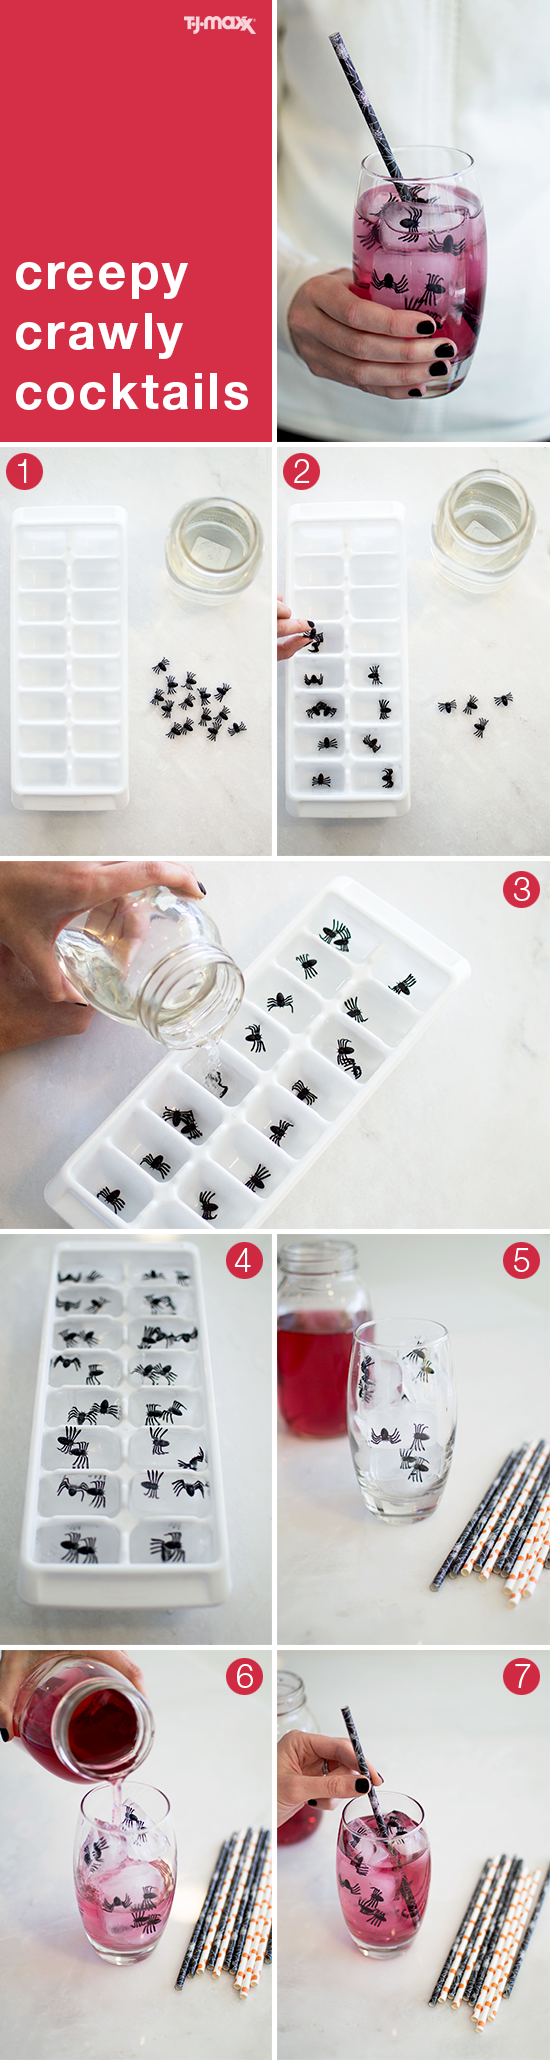 A Halloween party DIY: Give ice cubes a spooky twist by adding in tiny toy spiders. Start by putting the creepy crawlers in an